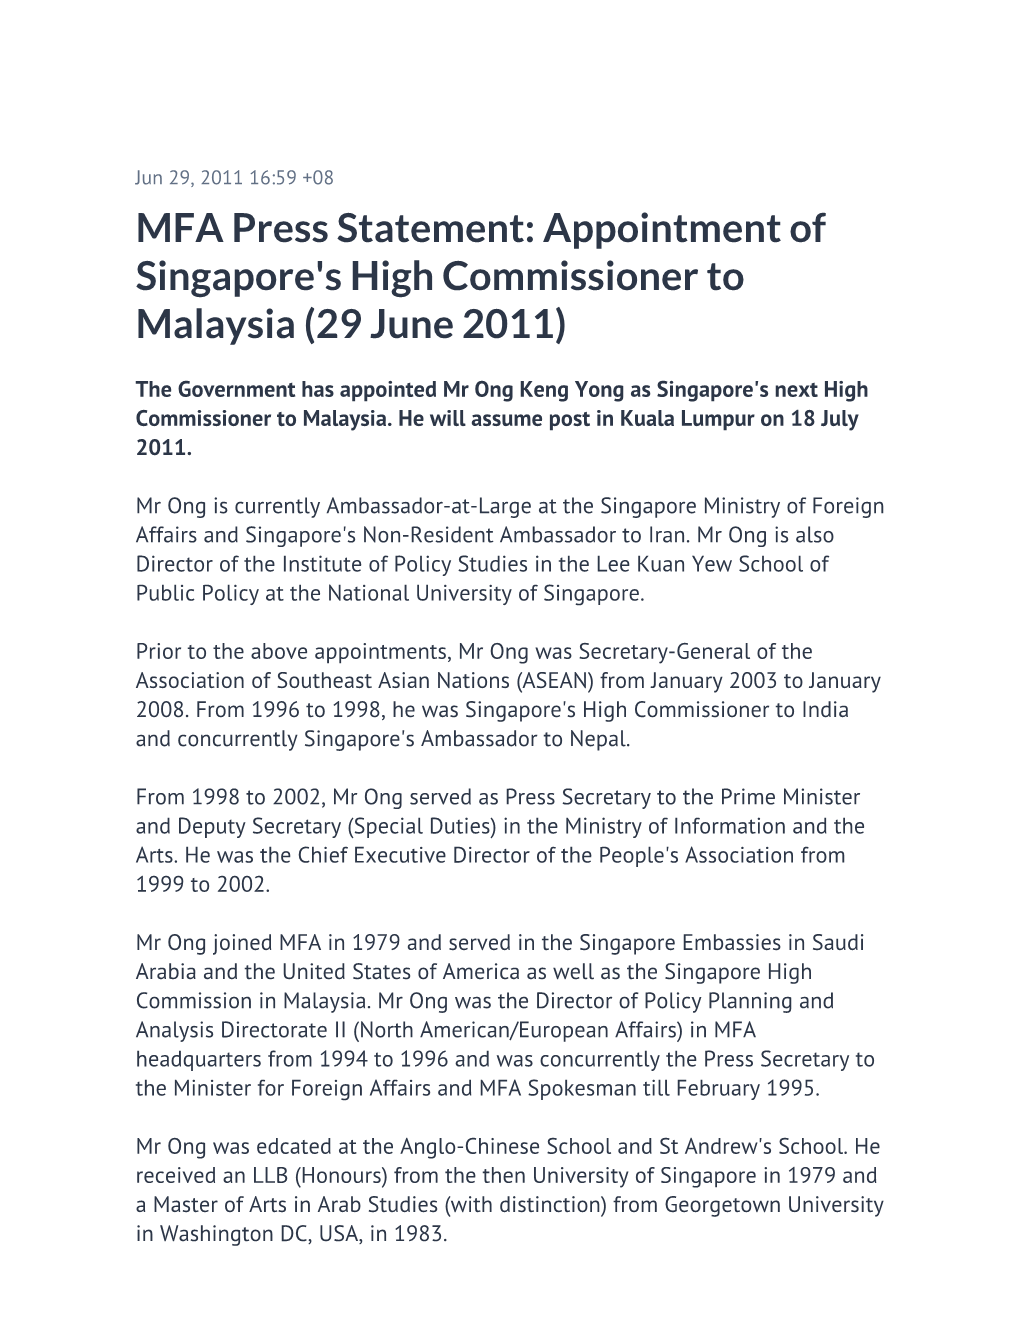 MFA Press Statement: Appointment of Singapore's High Commissioner to Malaysia (29 June 2011)